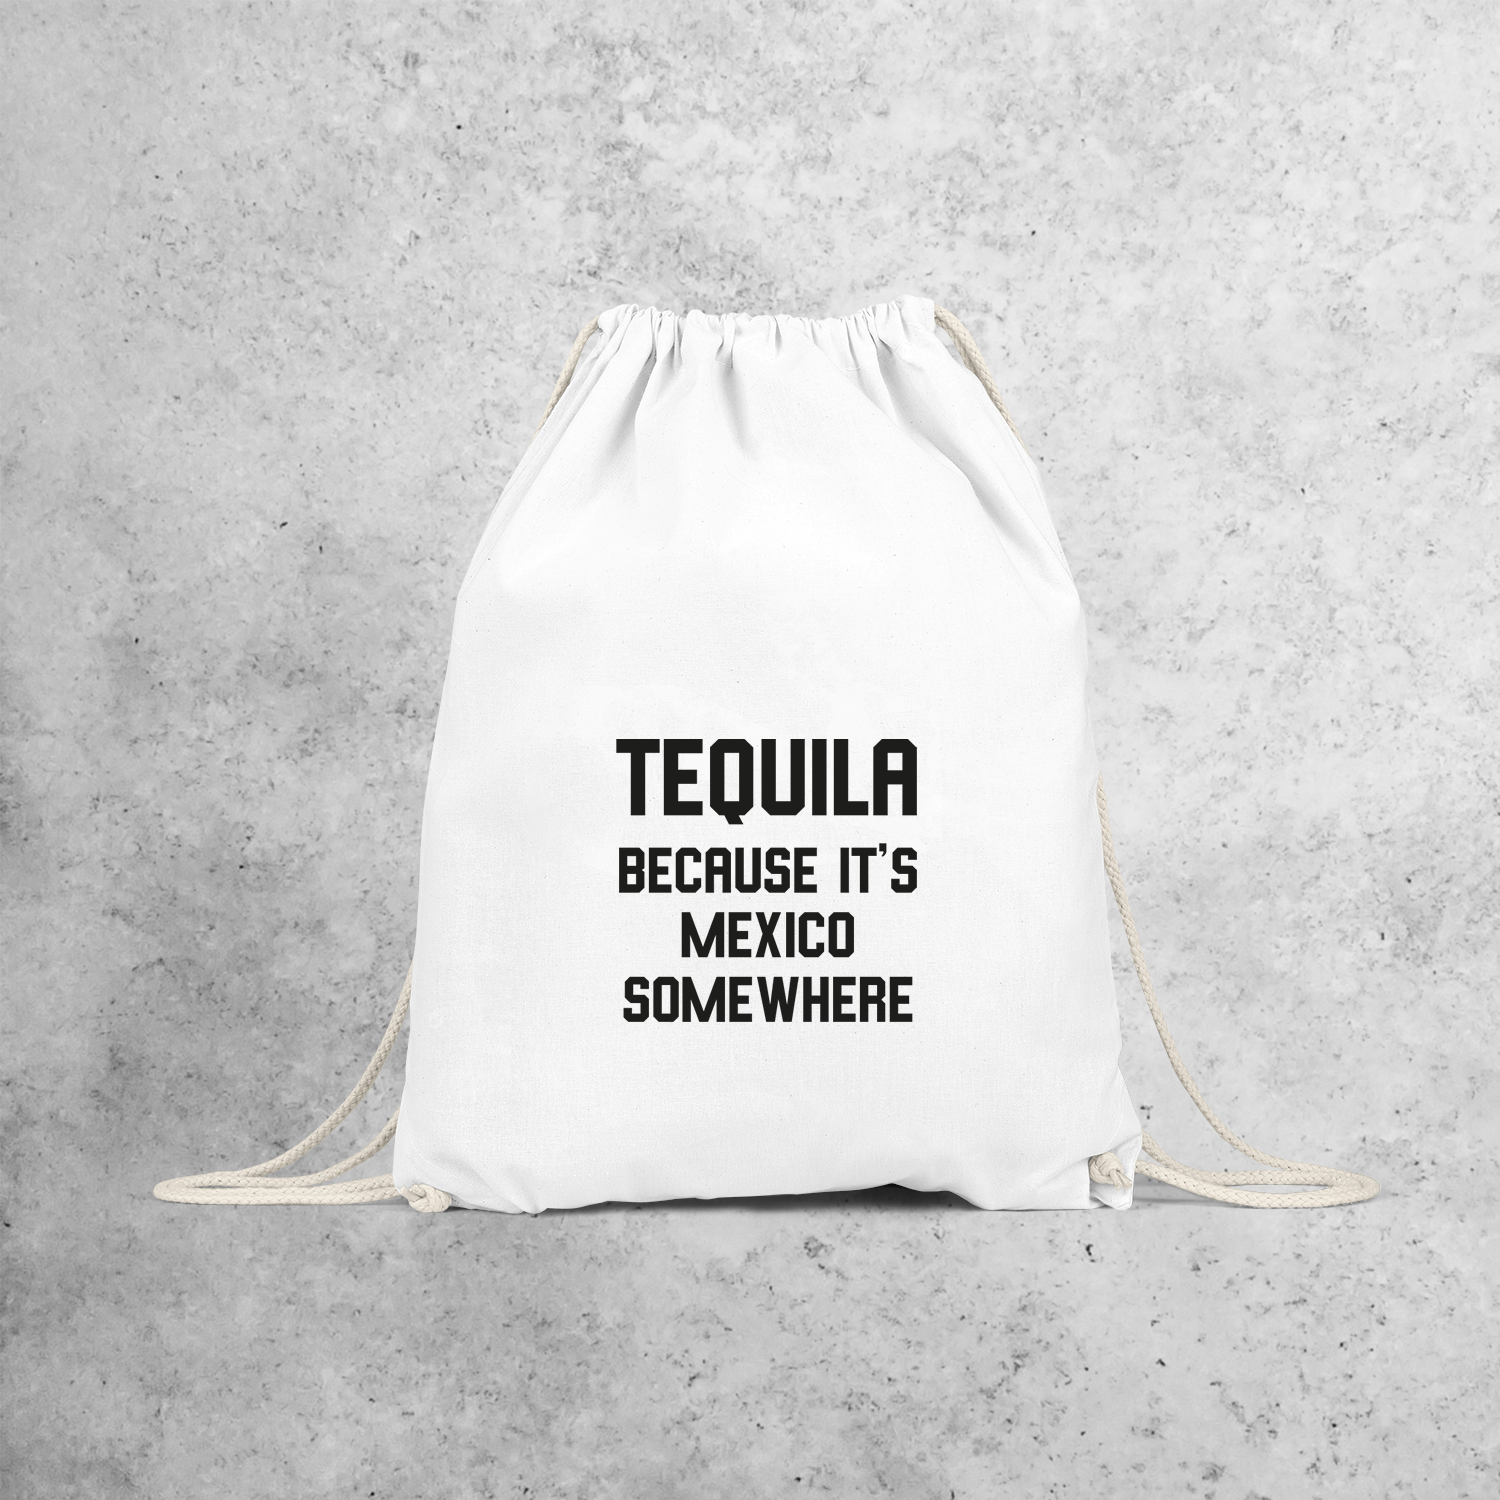 'Tequila, because it's Mexico somewhere' backpack